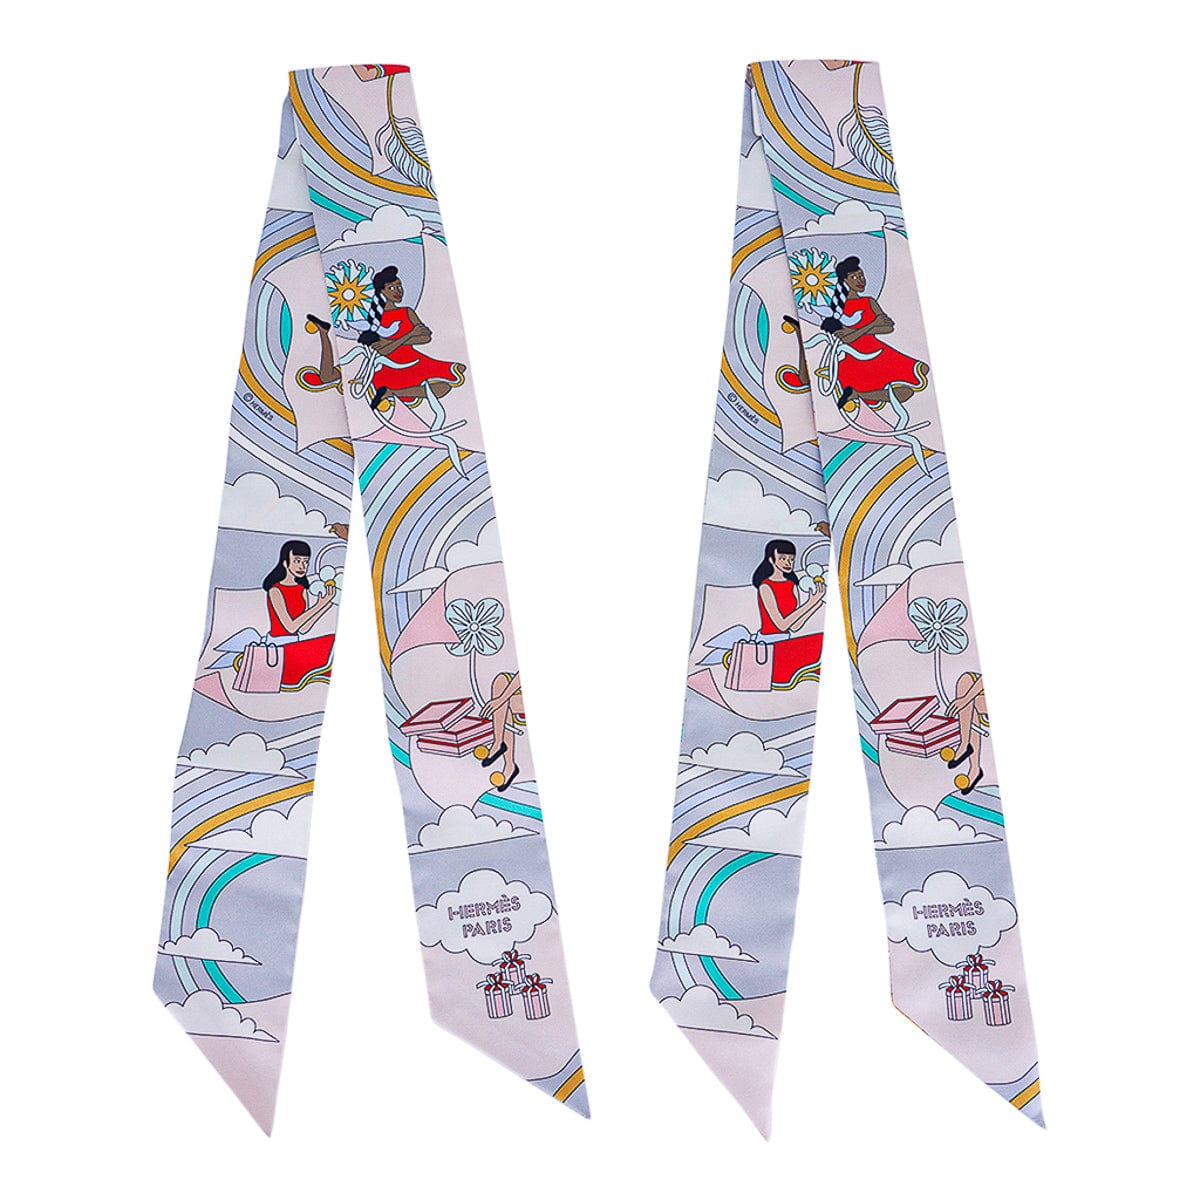 Hermes Twilly Carres Volants Gris Perle / Rose Pale Silk Scarf Set of 2